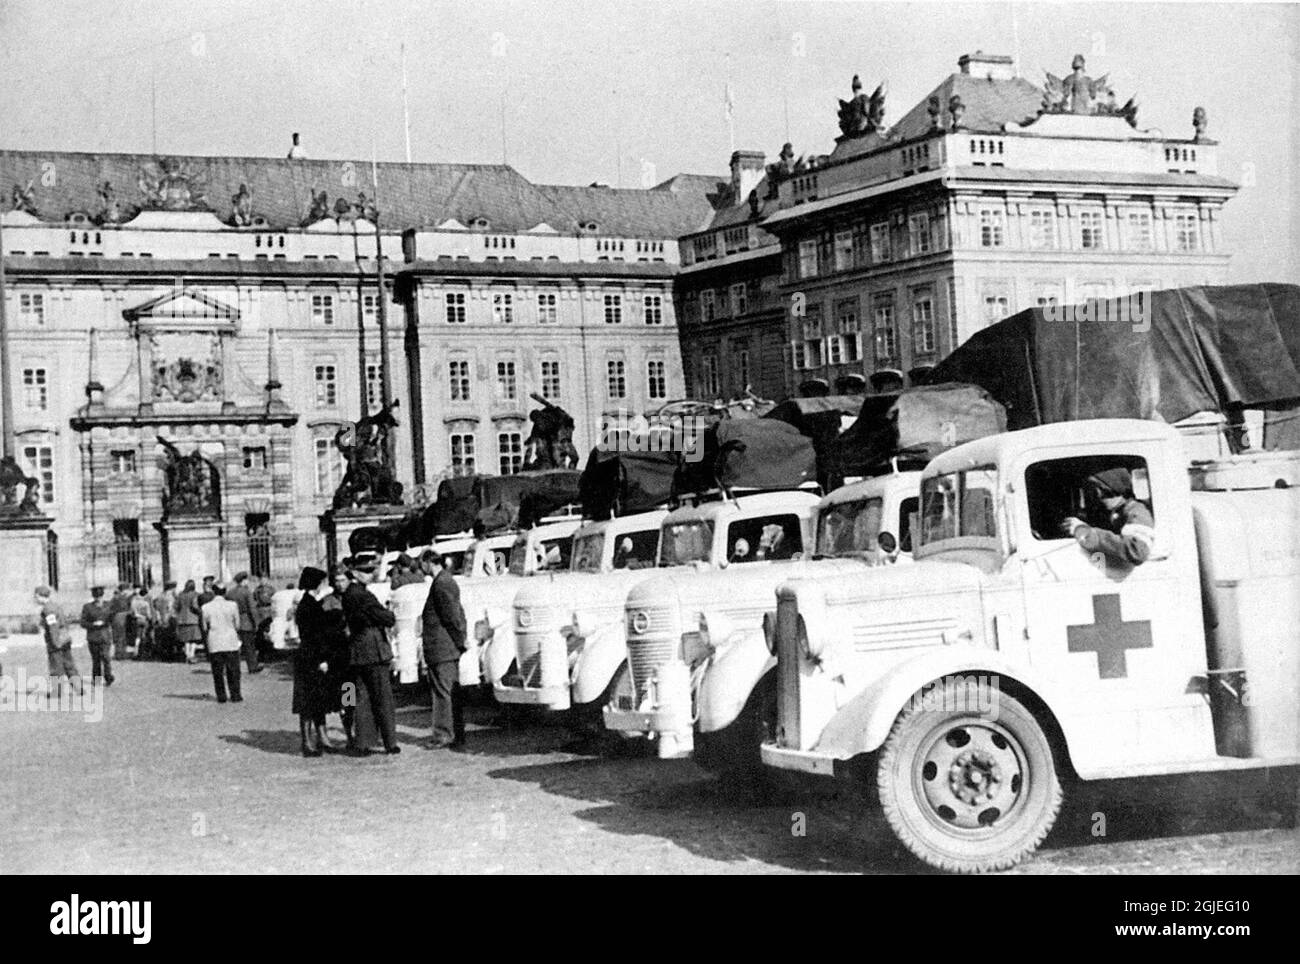 The Swedish Red cross White busses, organized by Swedish red Croww Chairman Count Folke Bernadotte whiched helped people to ecape Germany during the final stage of the second world war. The picture is from Czechoslovakia.Foto: SCANPIXCode: 20360 Stock Photo